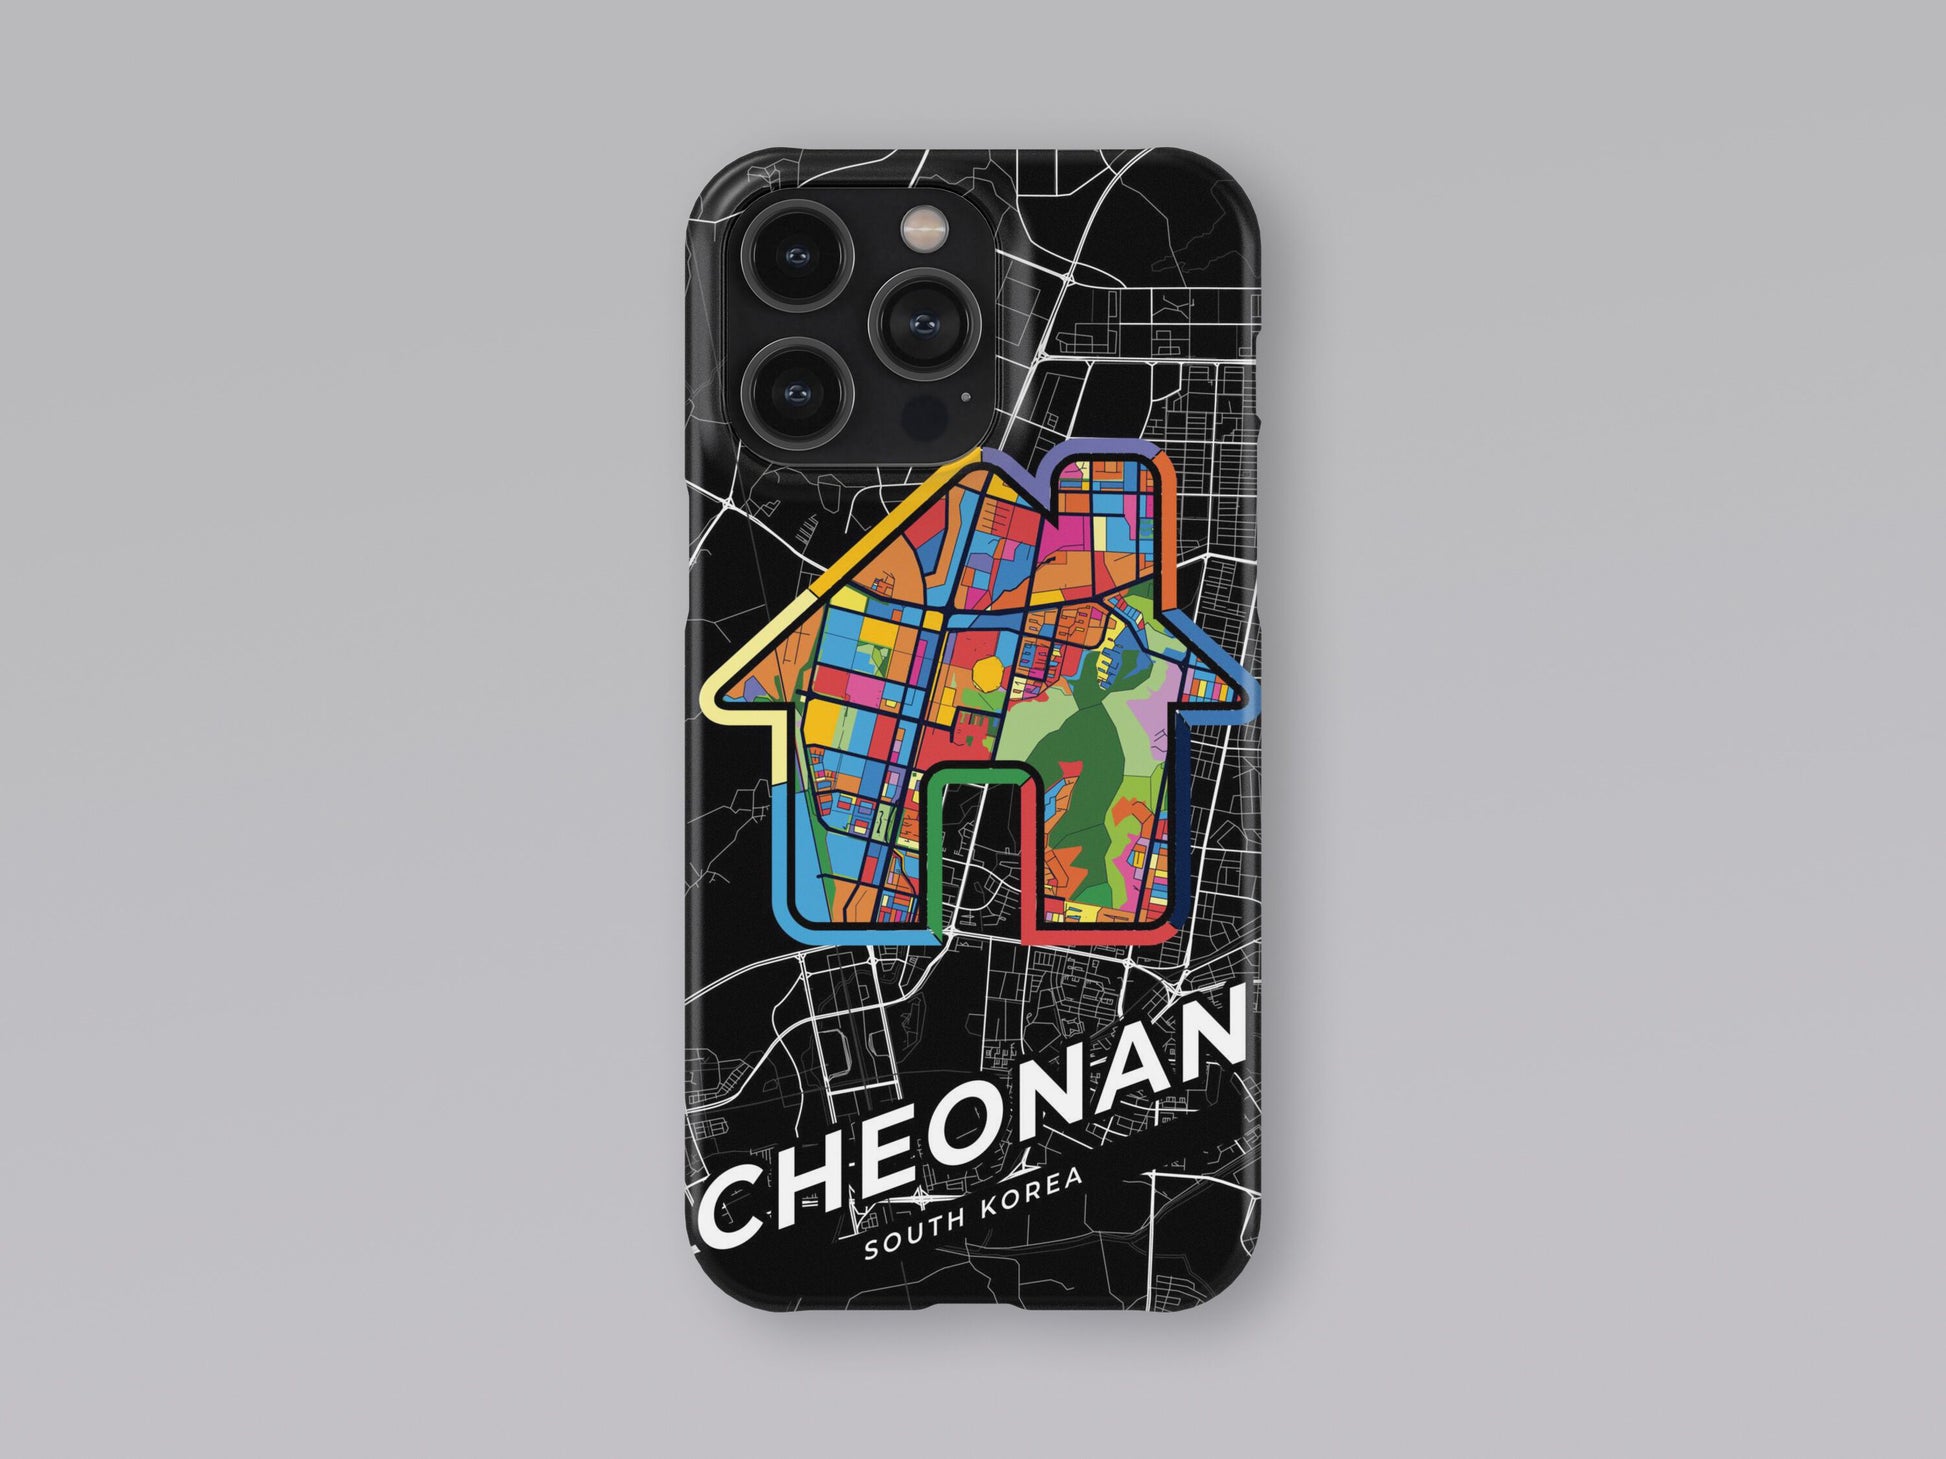 Cheonan South Korea slim phone case with colorful icon. Birthday, wedding or housewarming gift. Couple match cases. 3